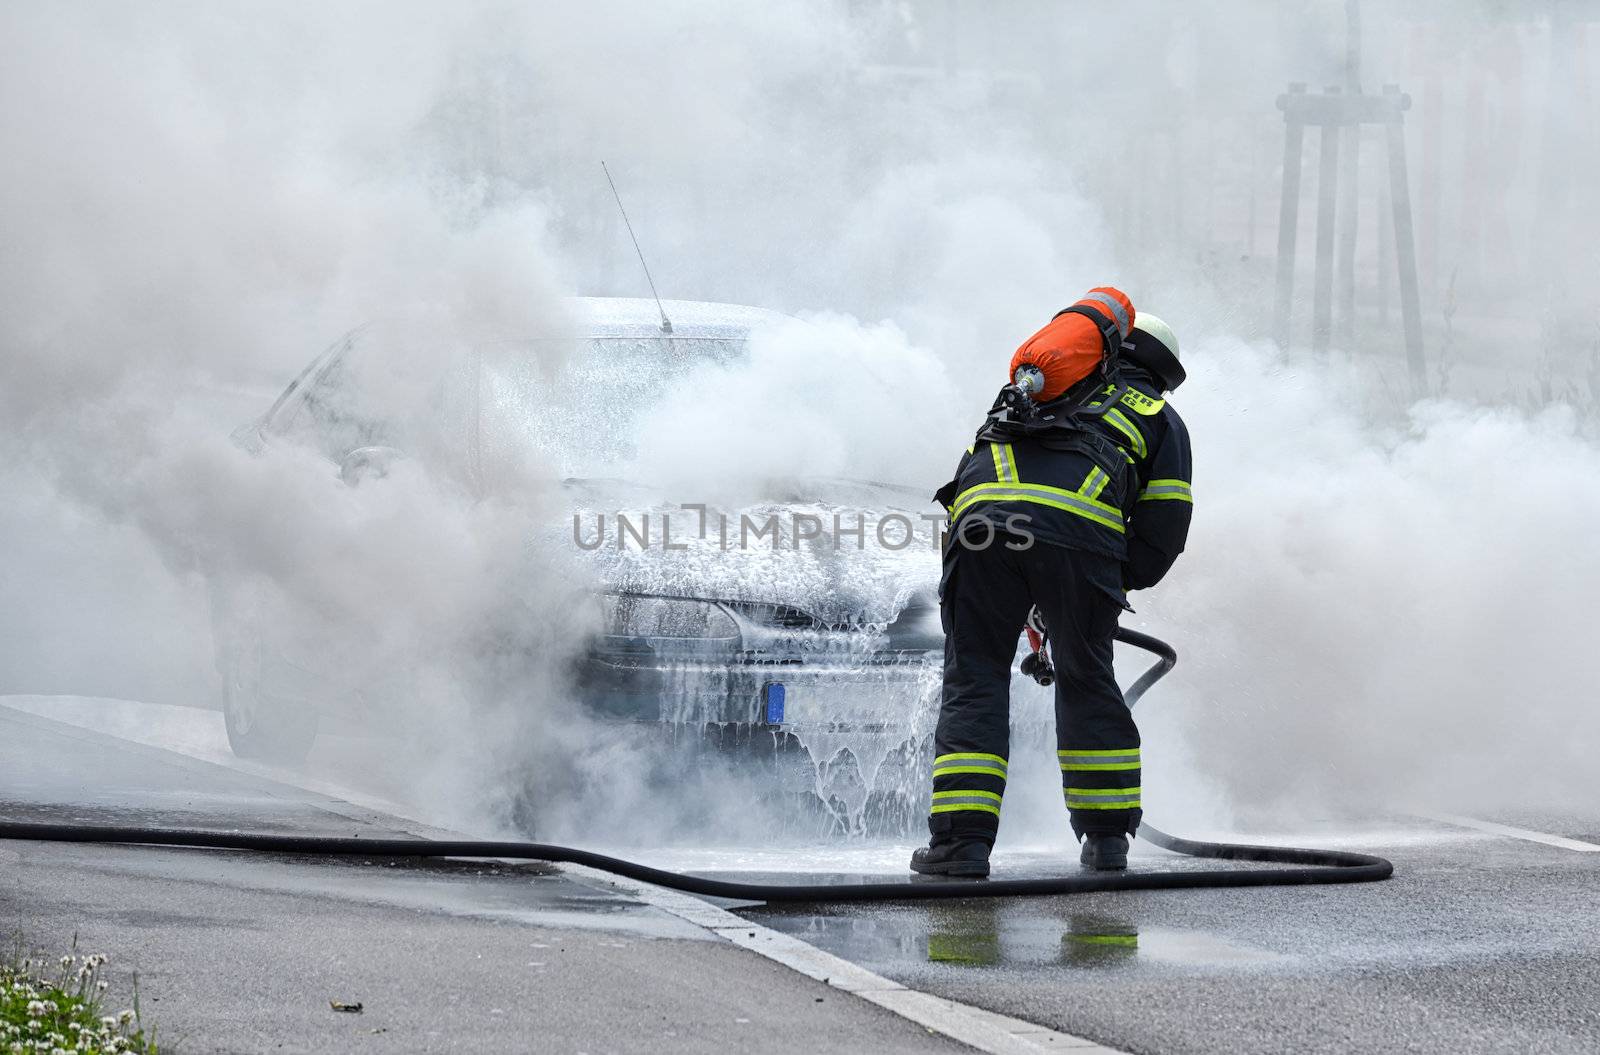 Burning motor vehicle been put out by fireman in protective clothing